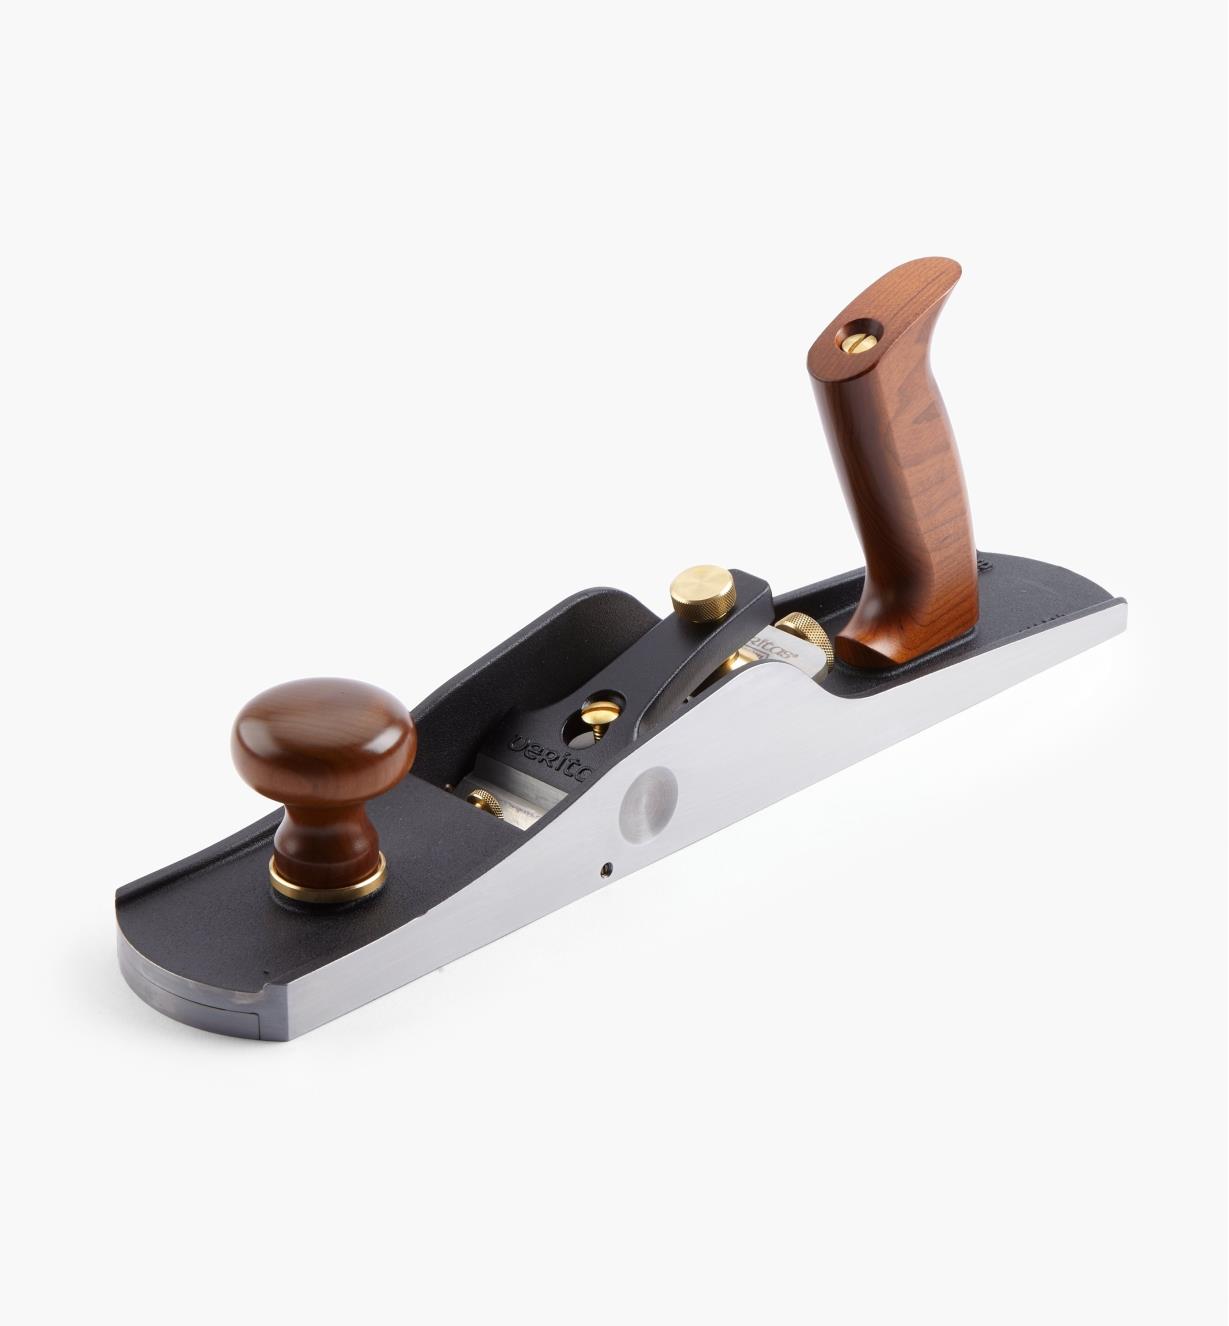 VS3450 - Low-Angle Jack Plane, PM-V11 – Manufacturing Second